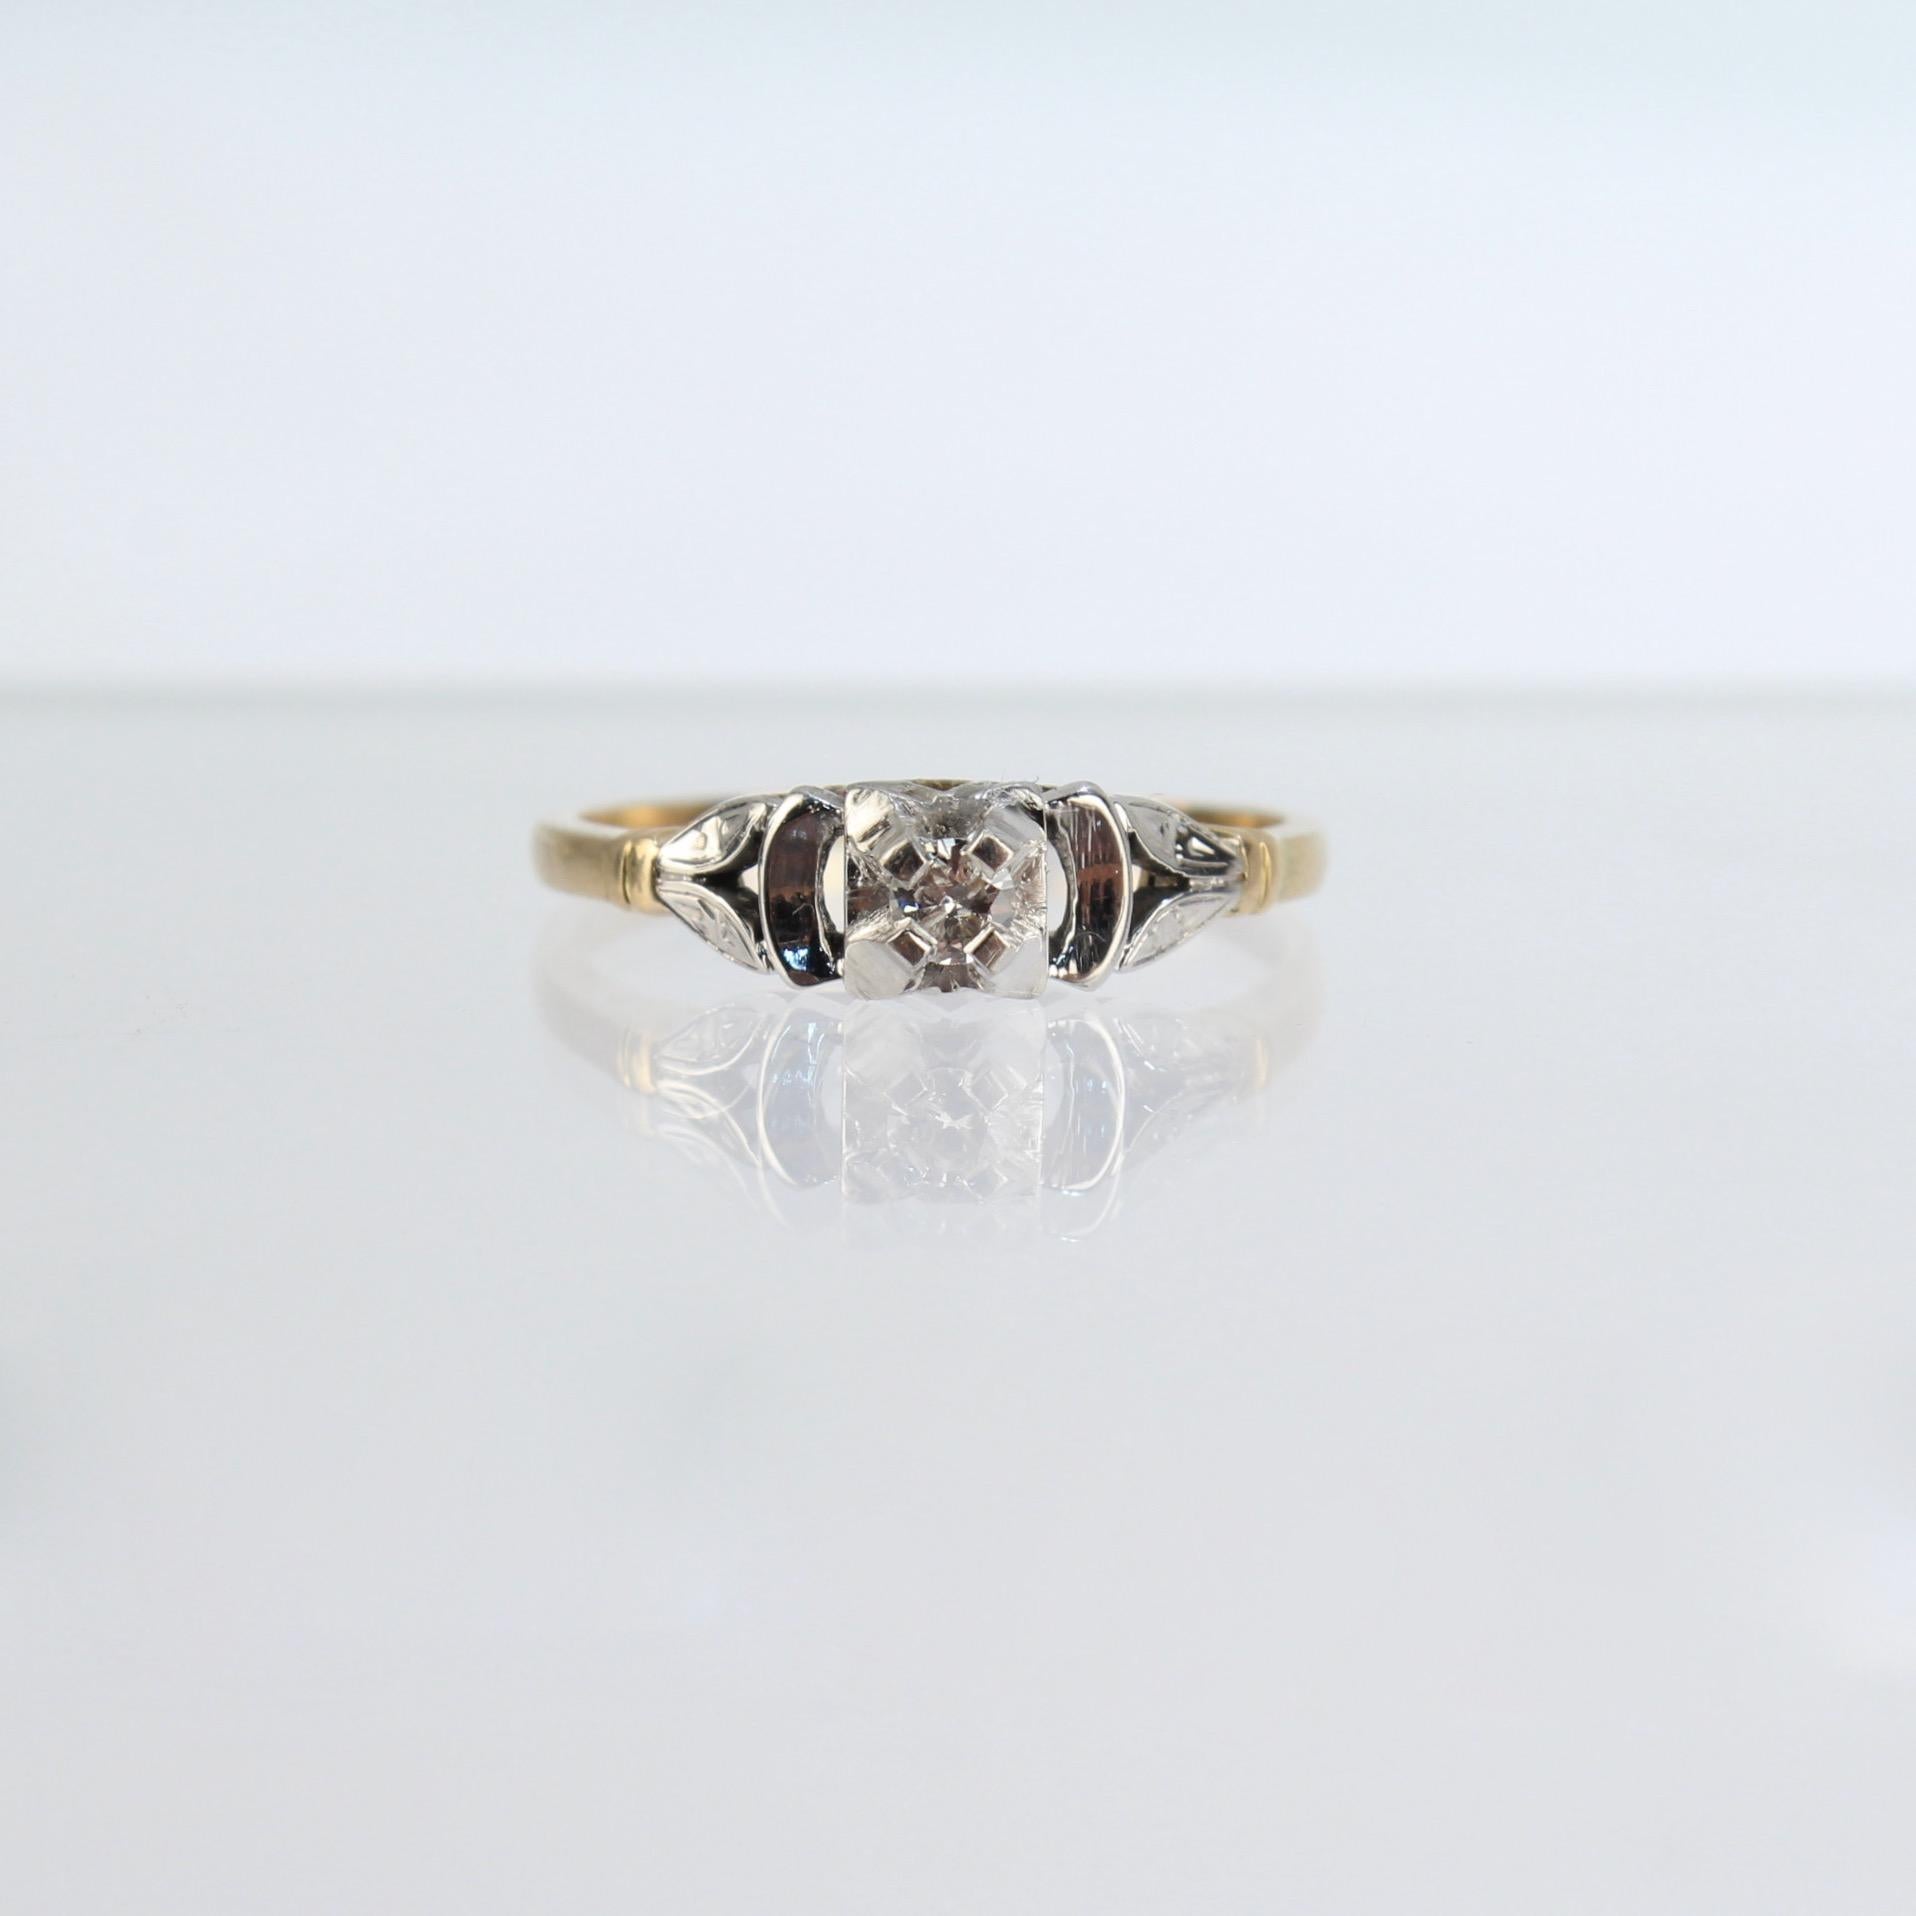 A very fine Art Deco engagement ring.

With a single diamond wonderfully set in a 14k white gold bridge supported by an 18k yellow gold shank.

Great mixed metals Art Deco design!

Date:
Early 20th Century

Overall Condition:
It is in overall good,